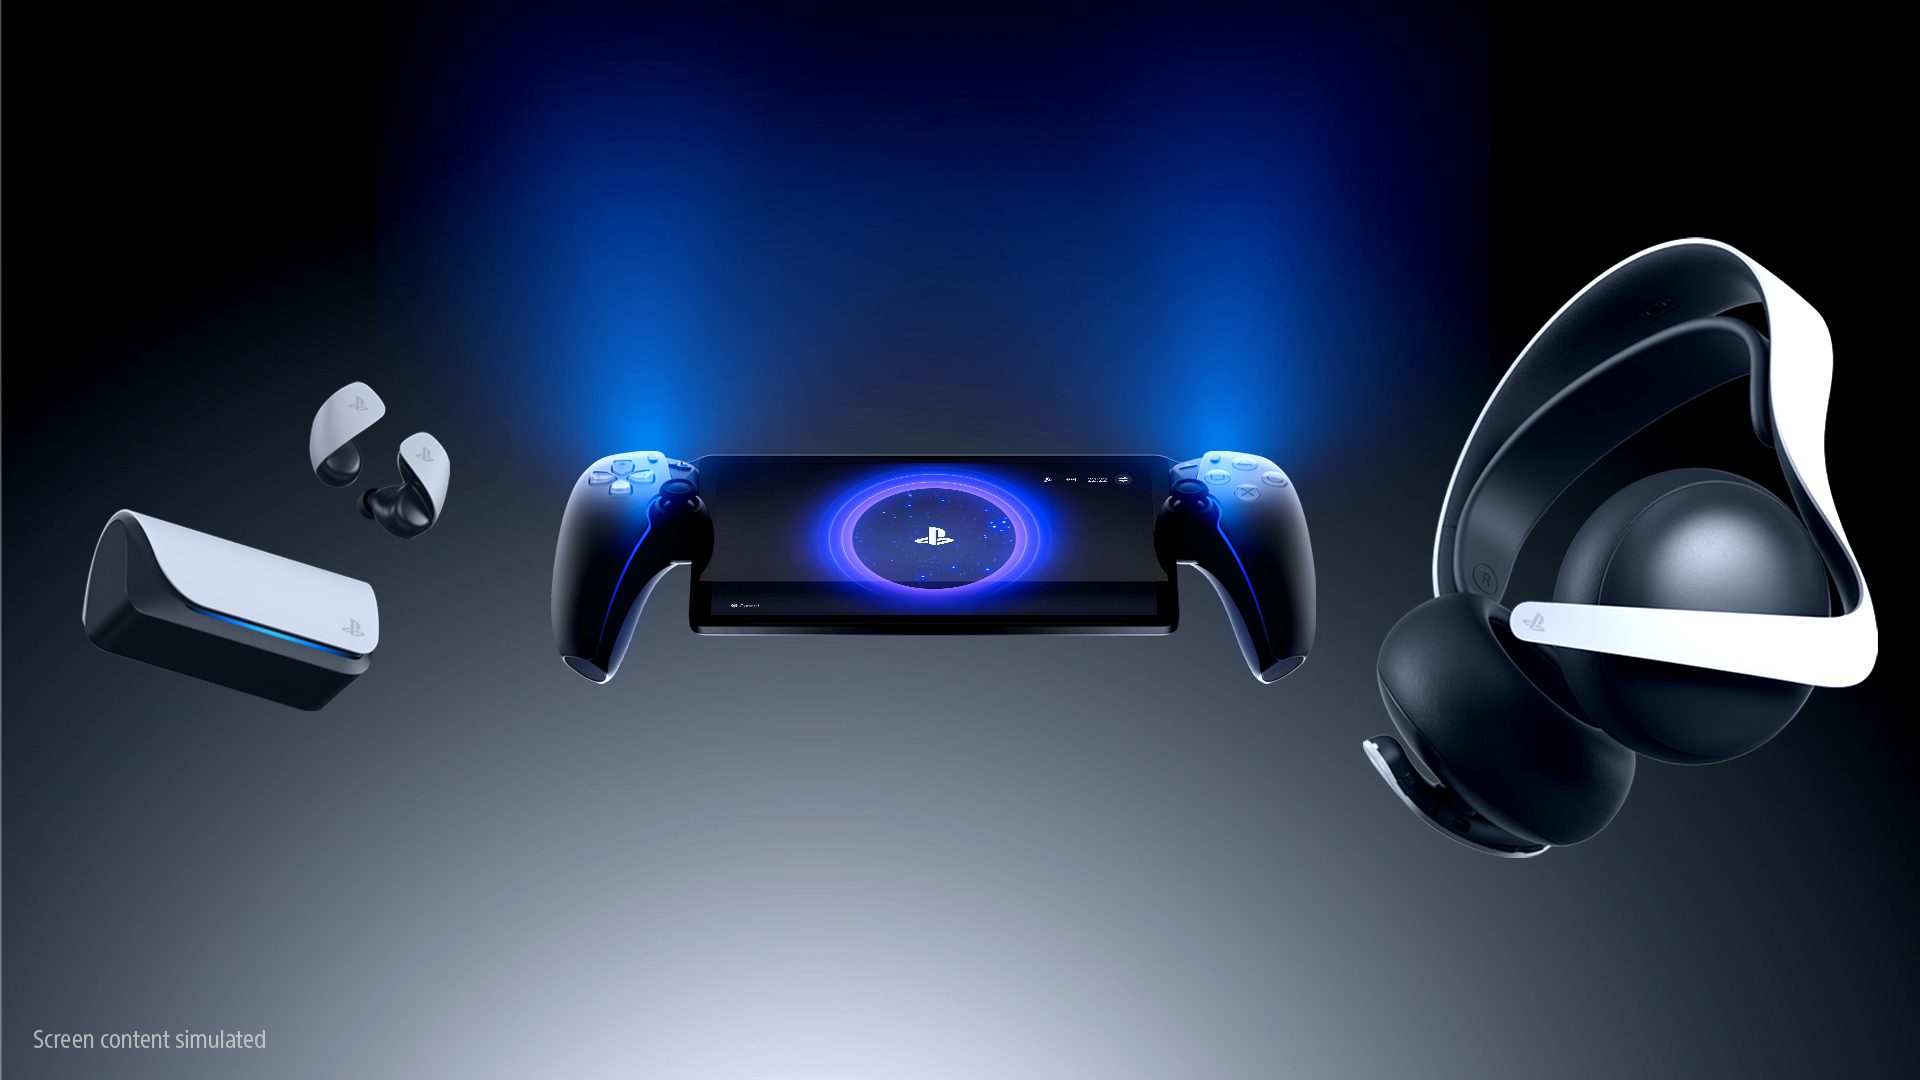 PlayStation’s first Remote Play dedicated device, PlayStation Portal remote player, to launch later this year at $199.99